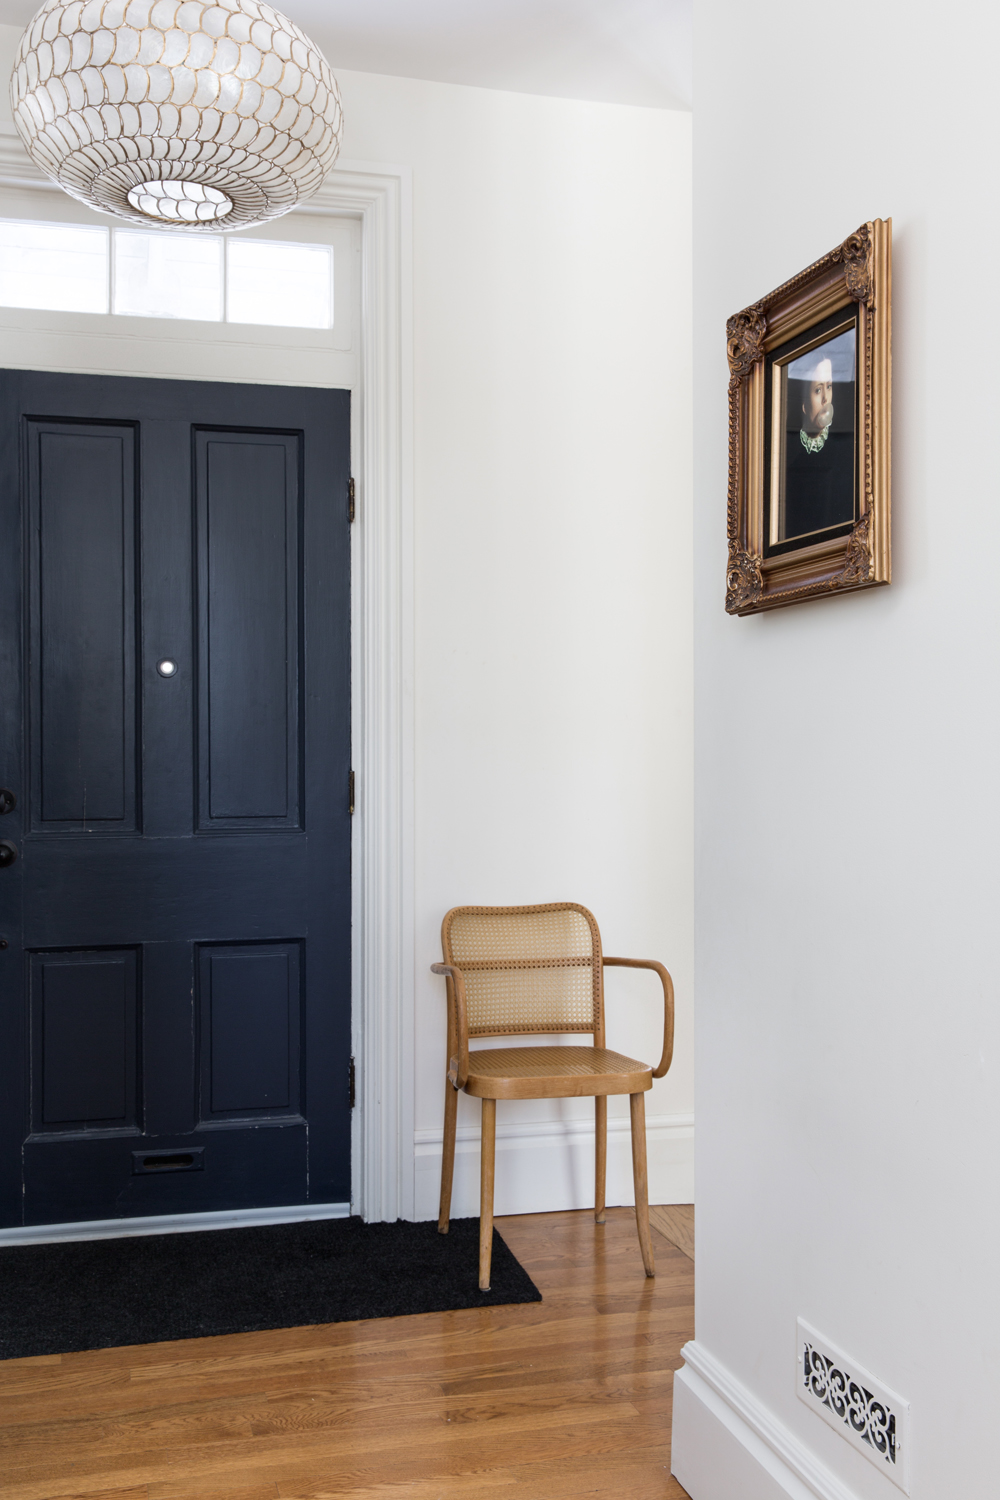 Entranceway to Parisian-inspired home with Thonet chair and gold-framed painting